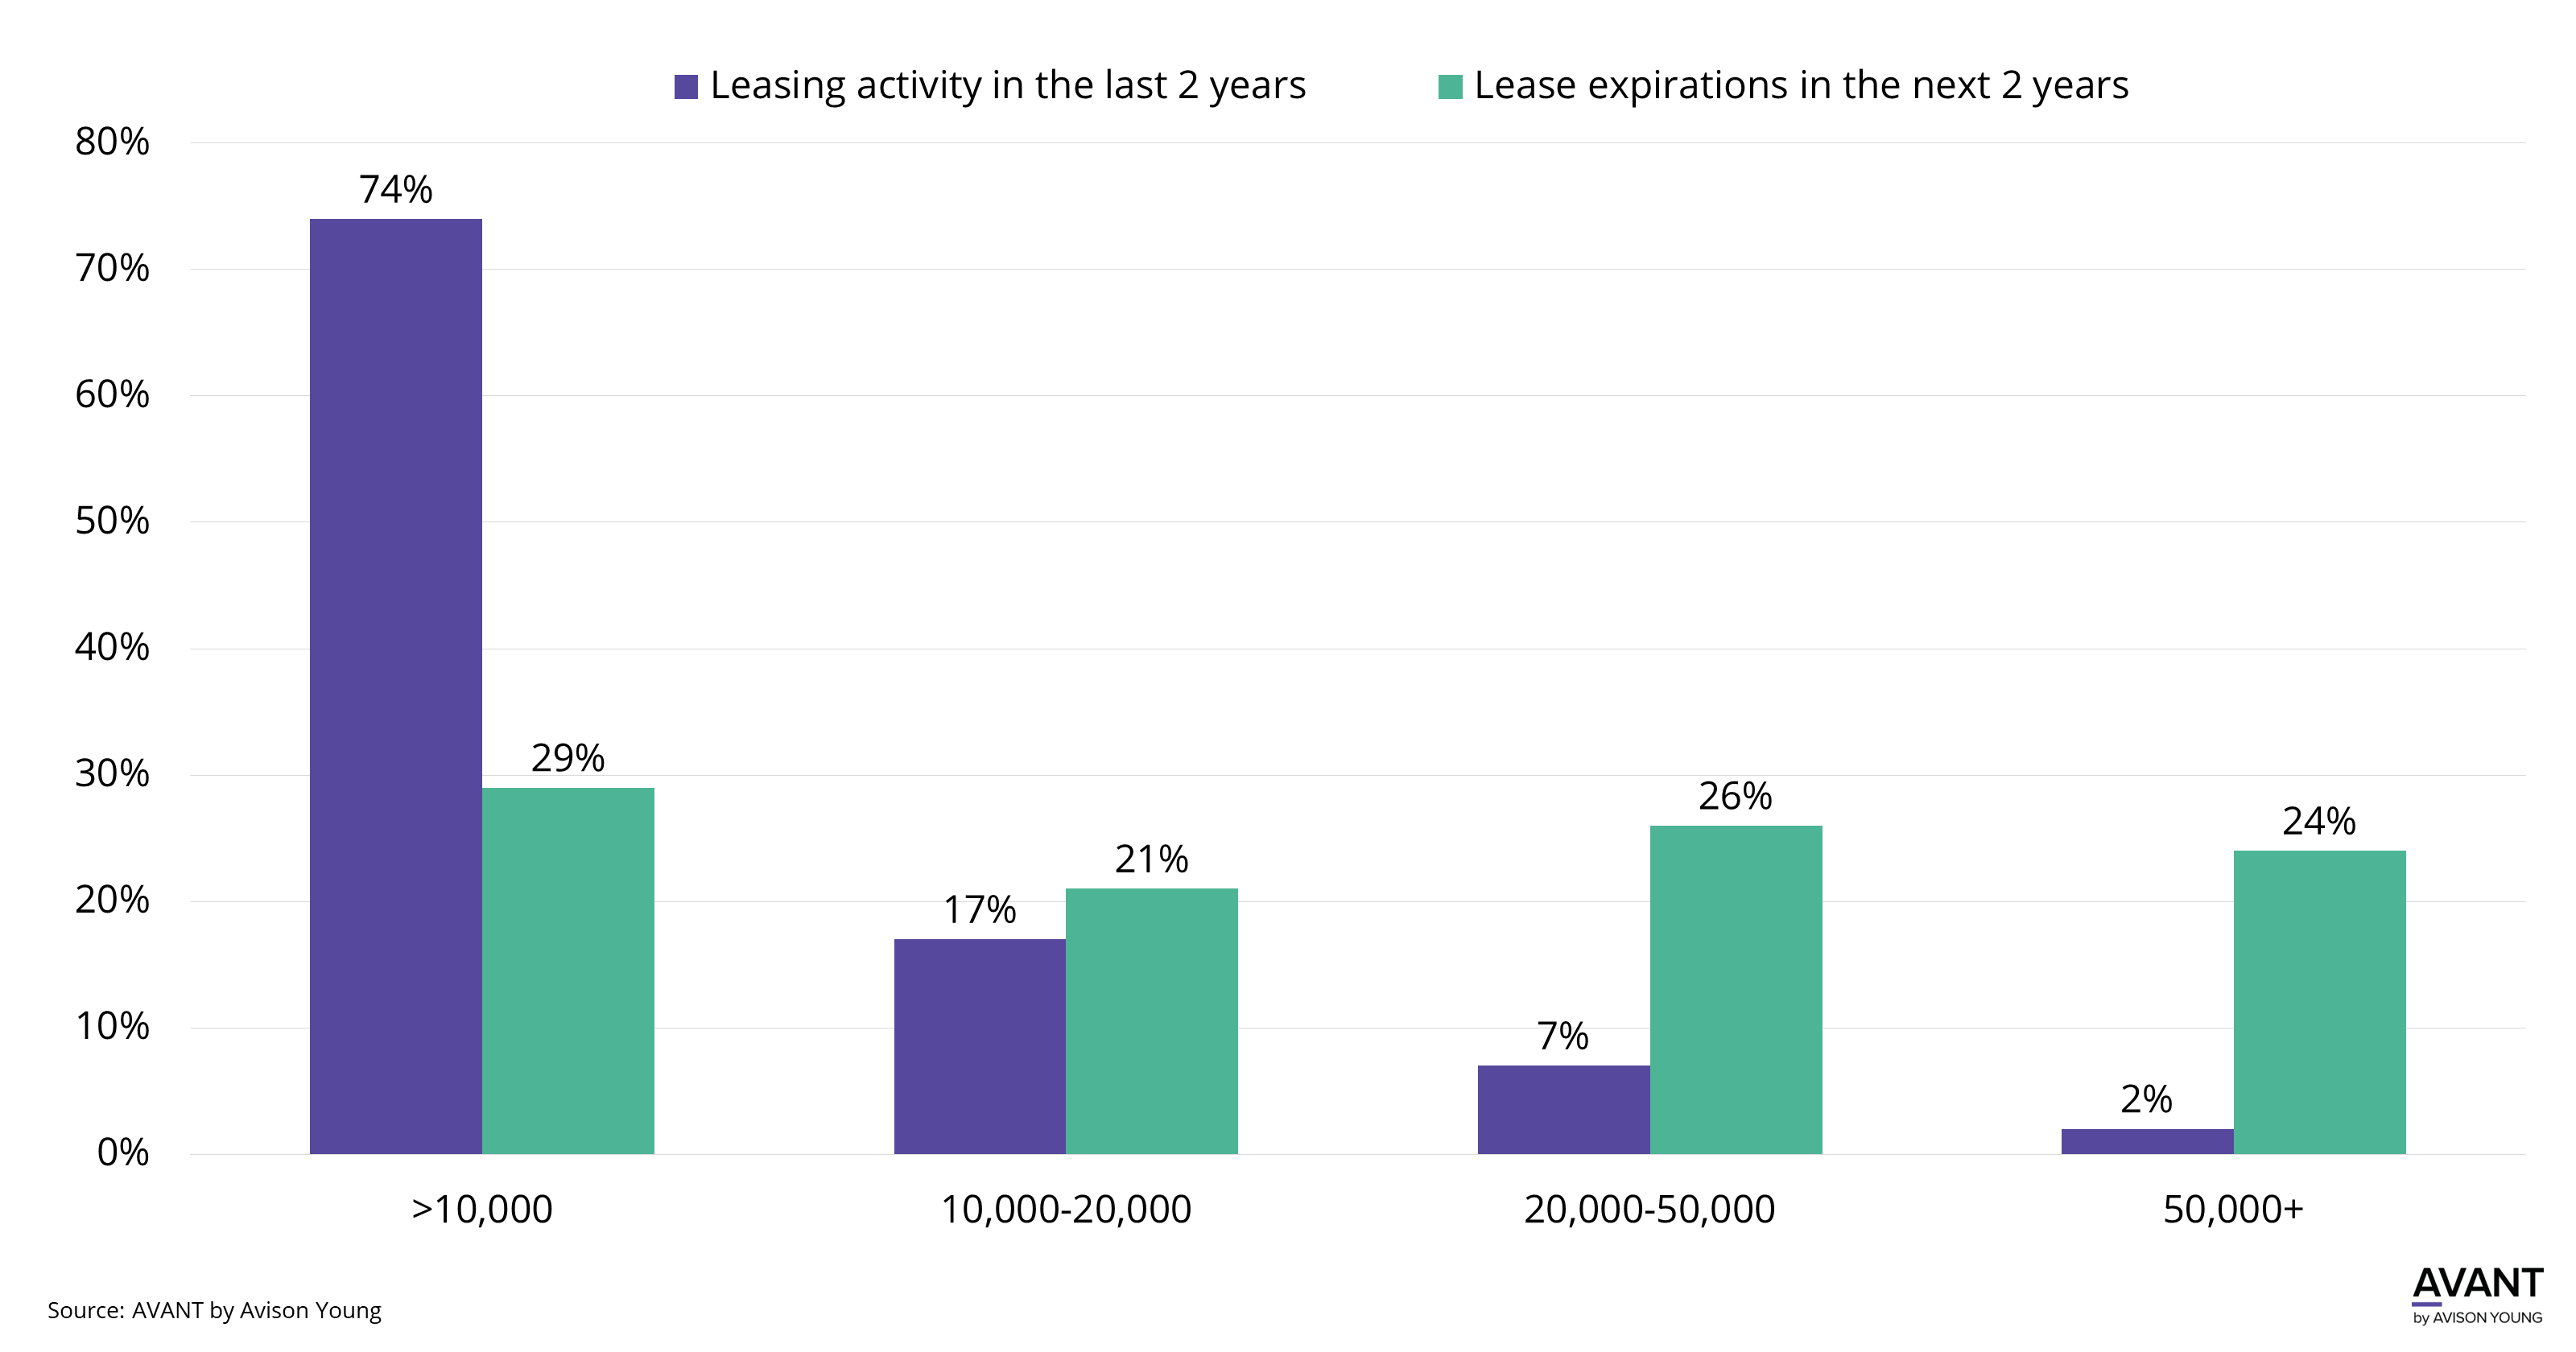 Graph showing office leasing activity in the last 2 years compared to lease expirations in the next 2 years ranging from 10,000 square feet to 50,000 square feet in West Palm Beach